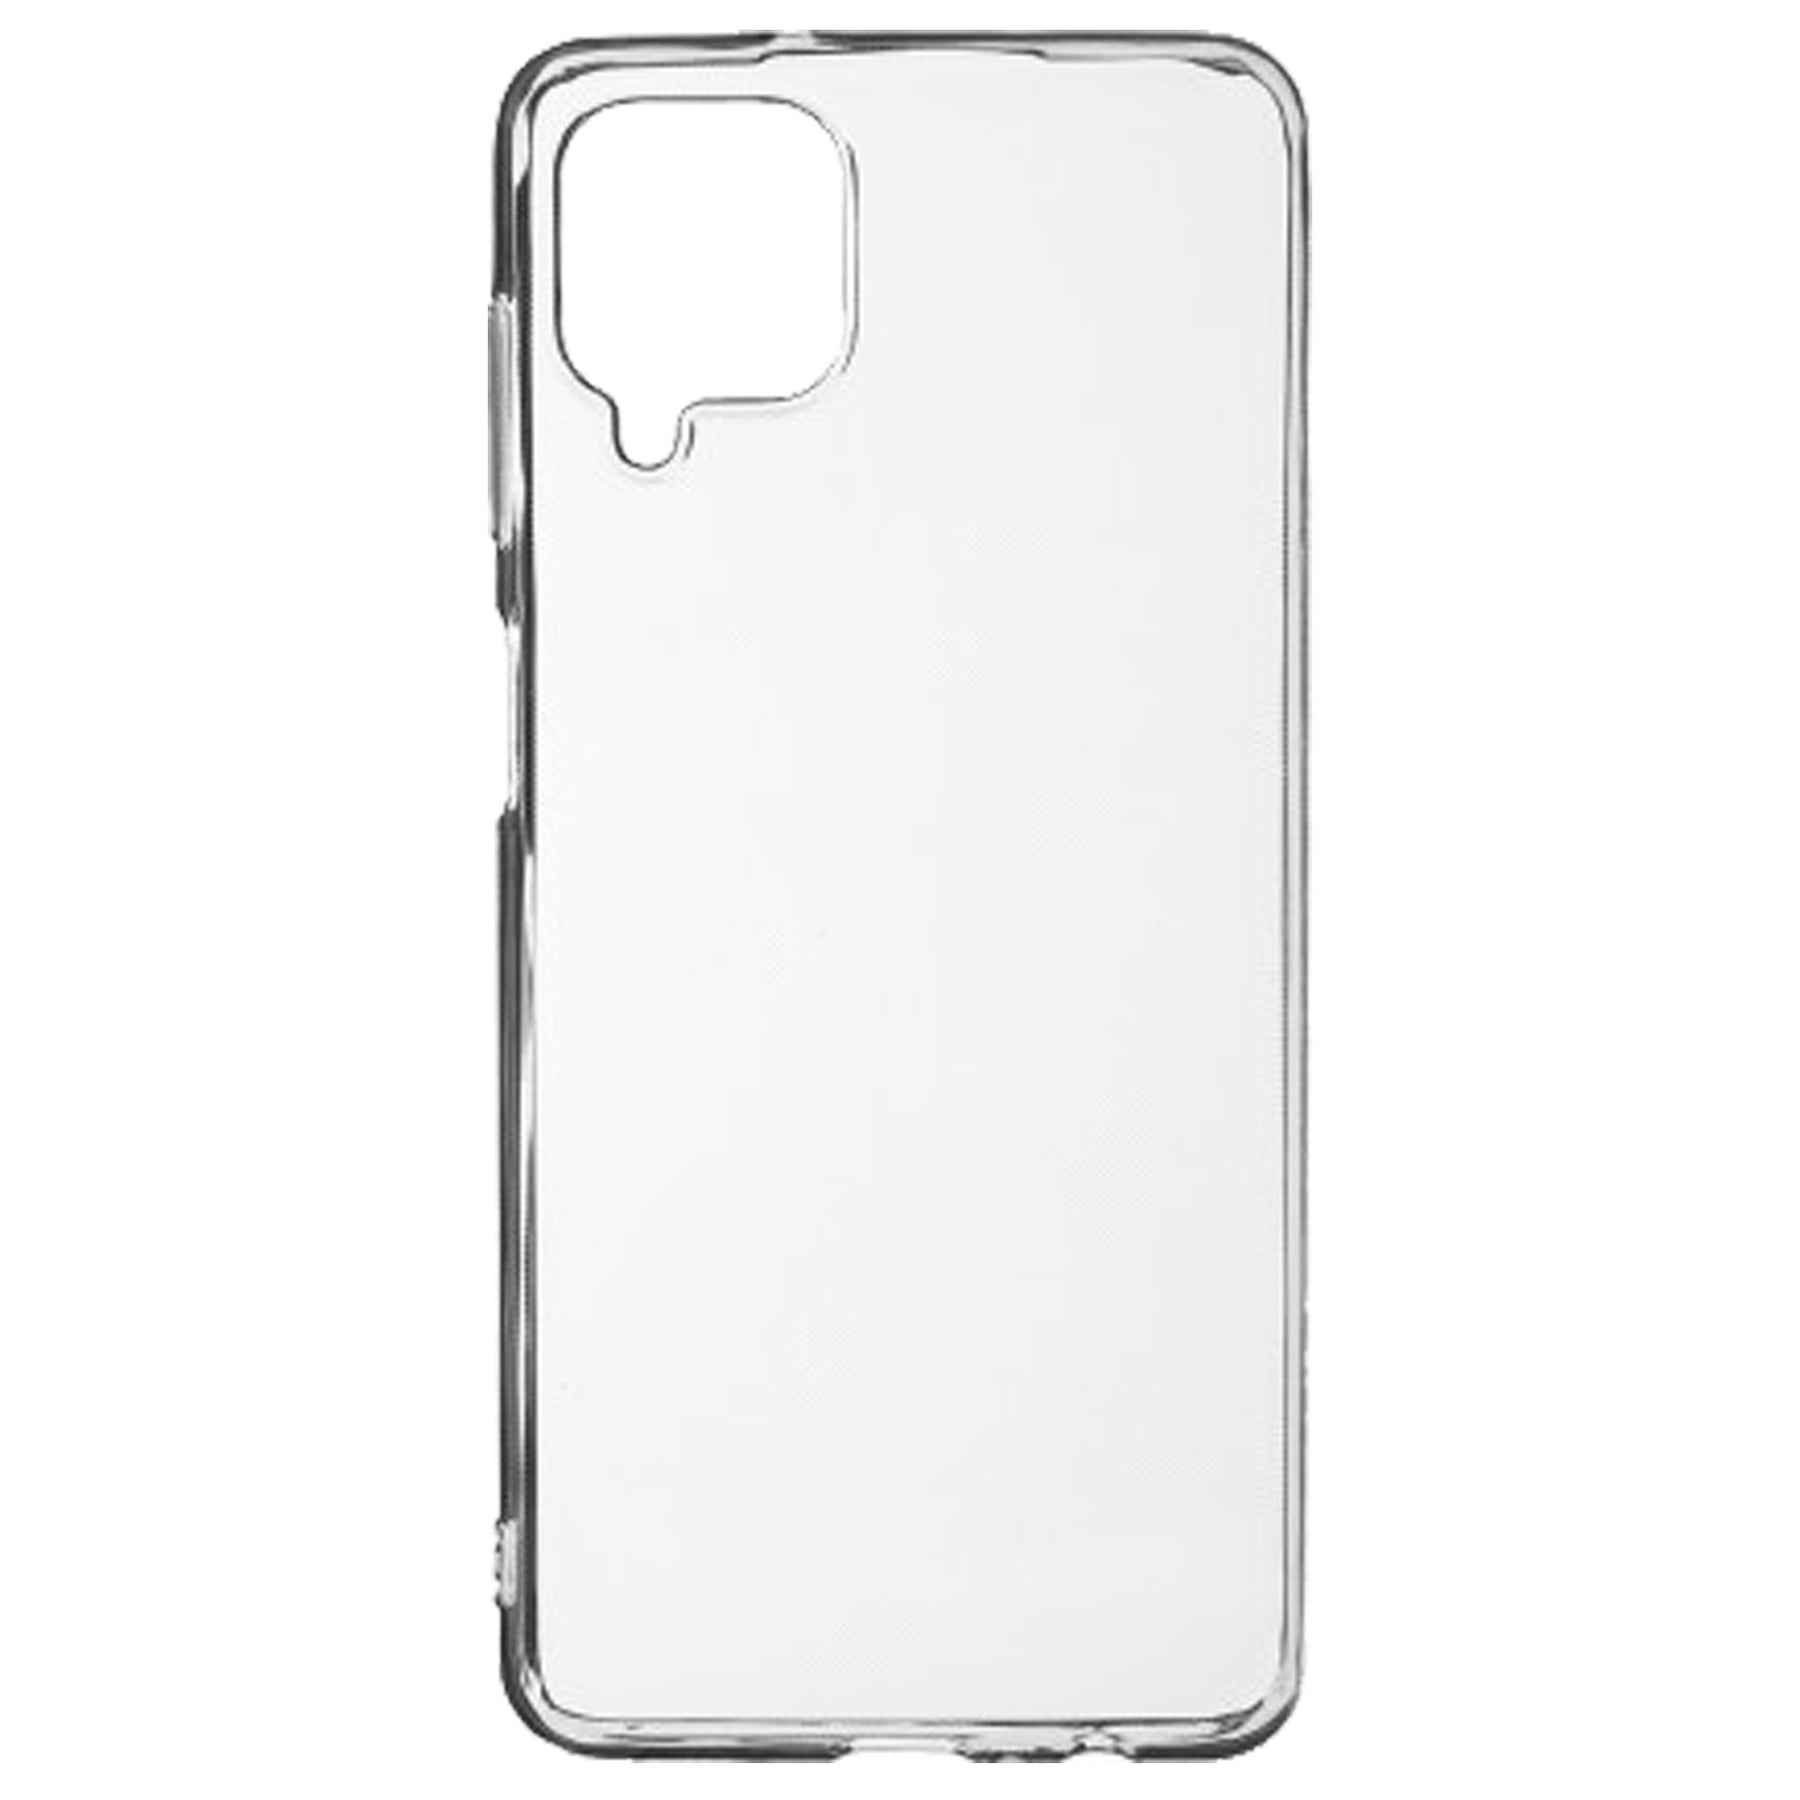 Samsung A12 invisible clear case